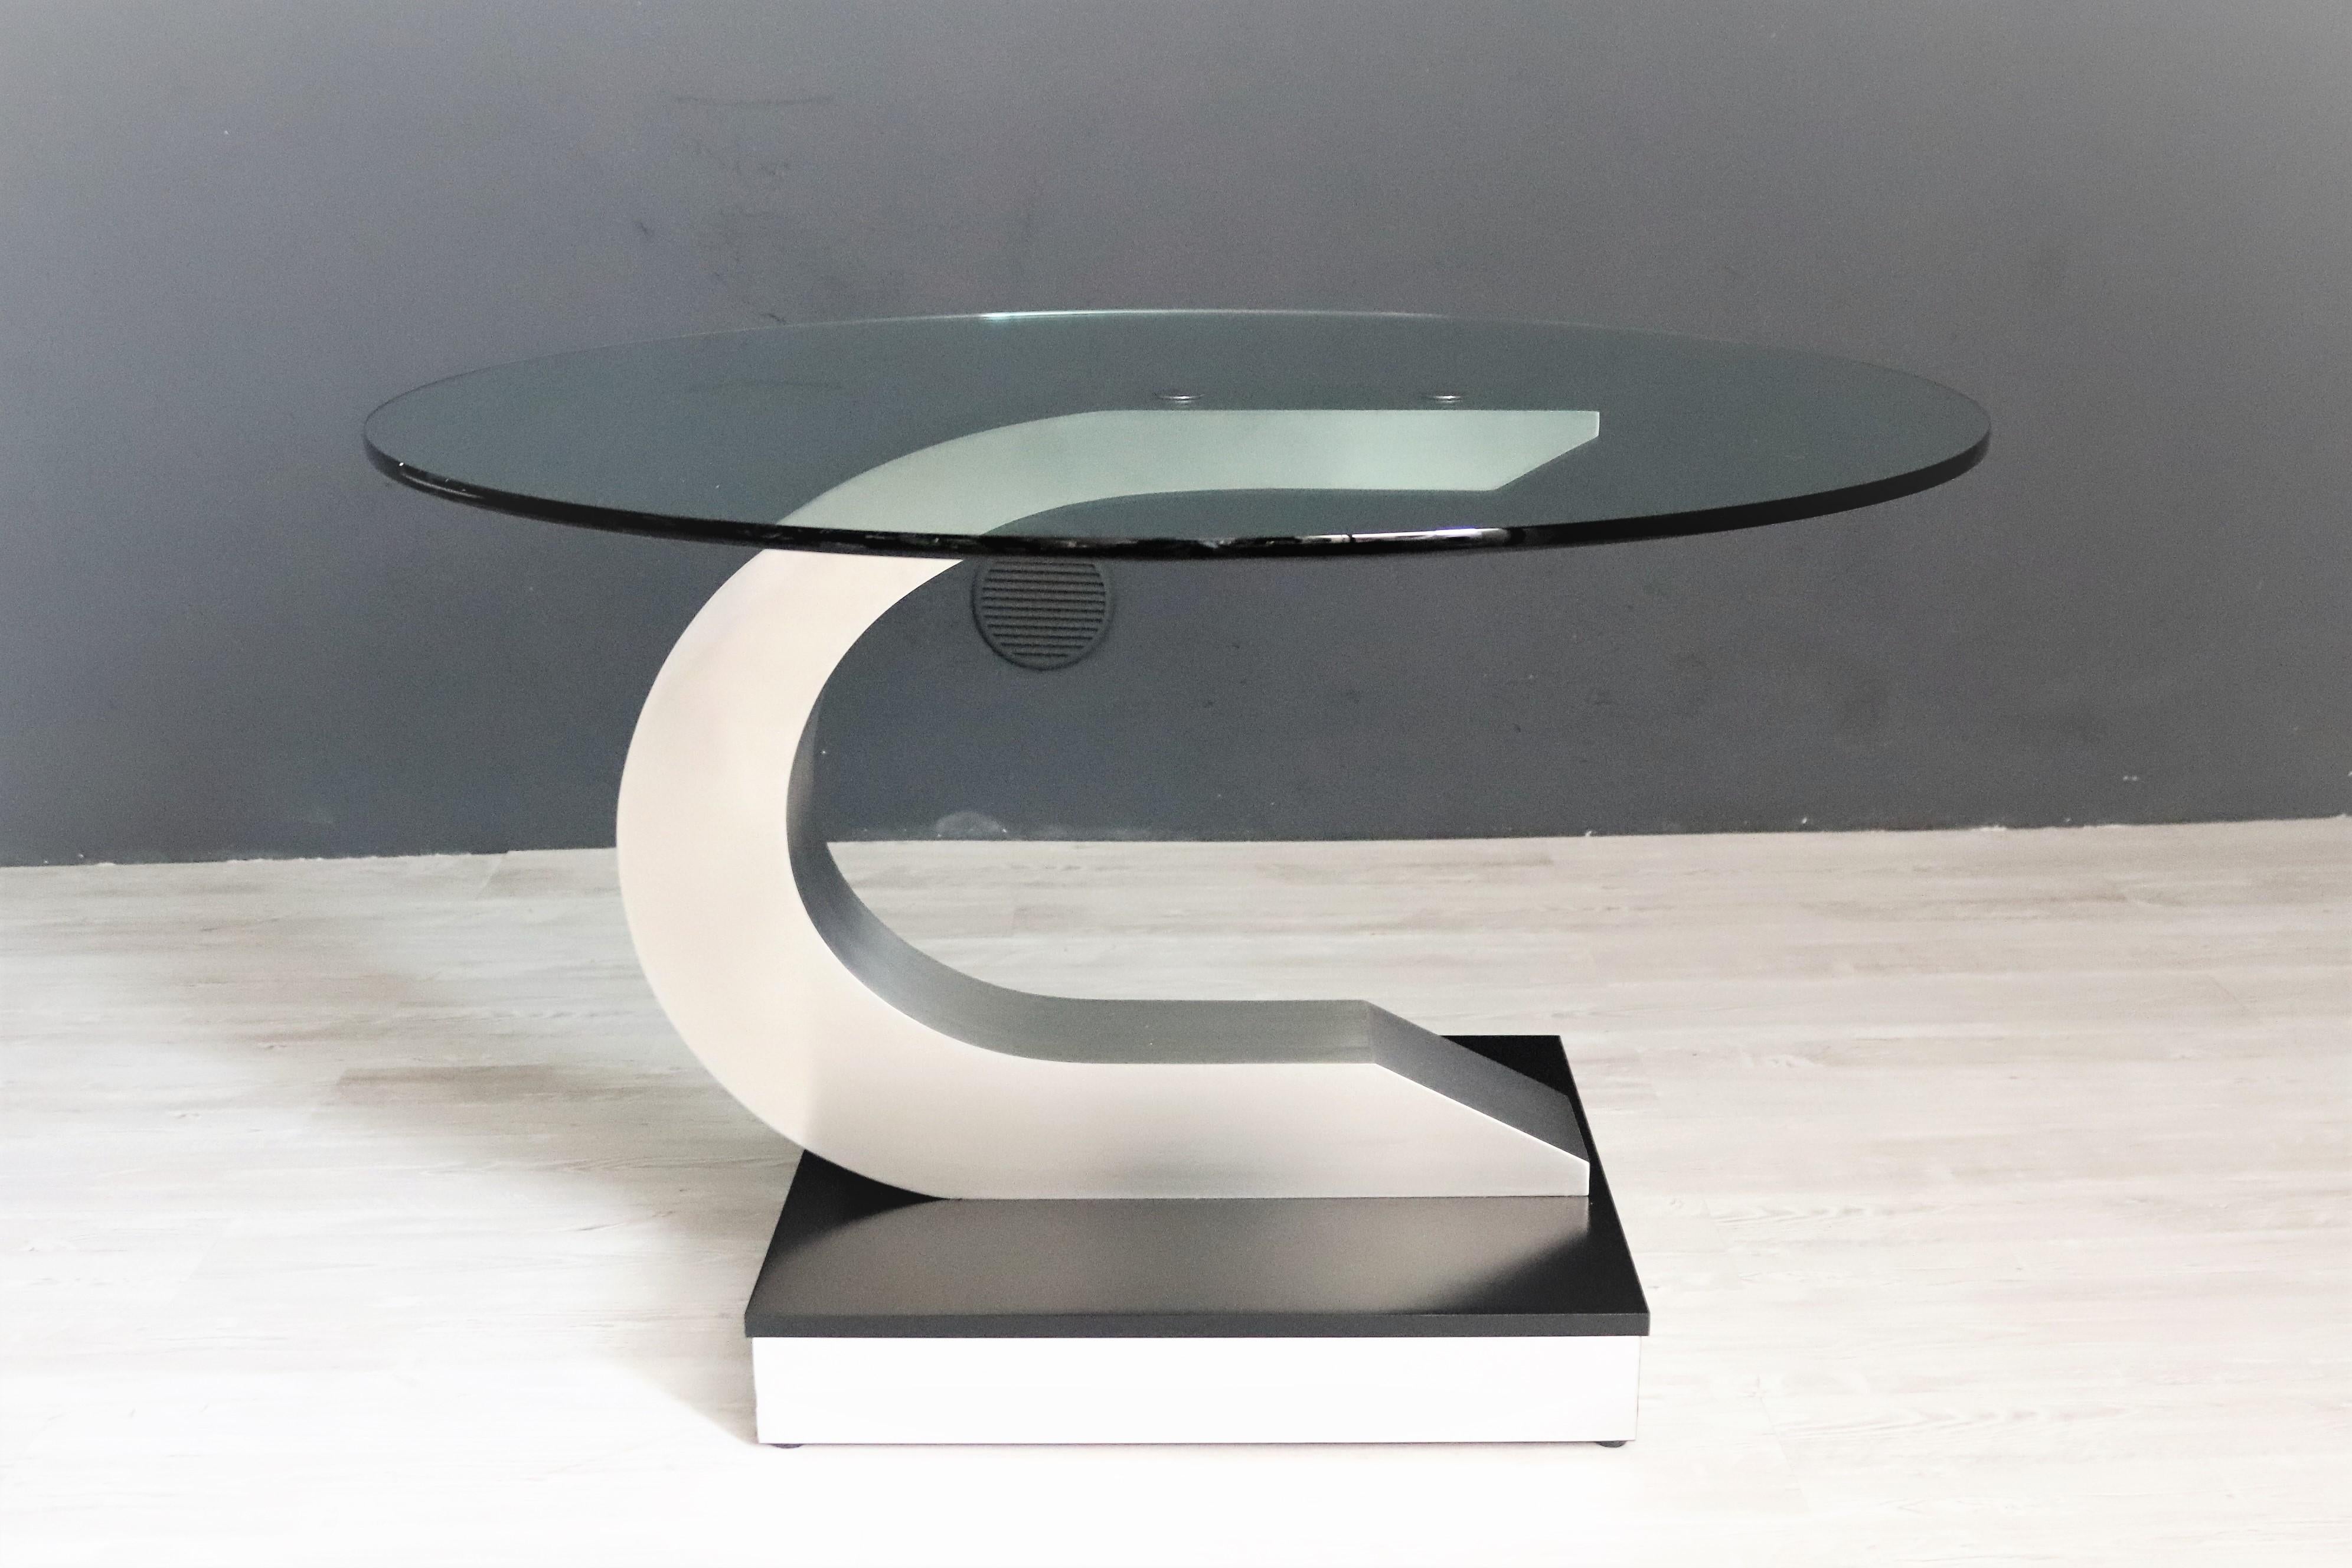 Magnificent round dining table with thick crystal glass in the style of Pierre Cardin.
Made in Italy during the 1970s.
The table base is made of strong stainless steel on wooden lacquered black base, whilst the glass top is mounted with two thick